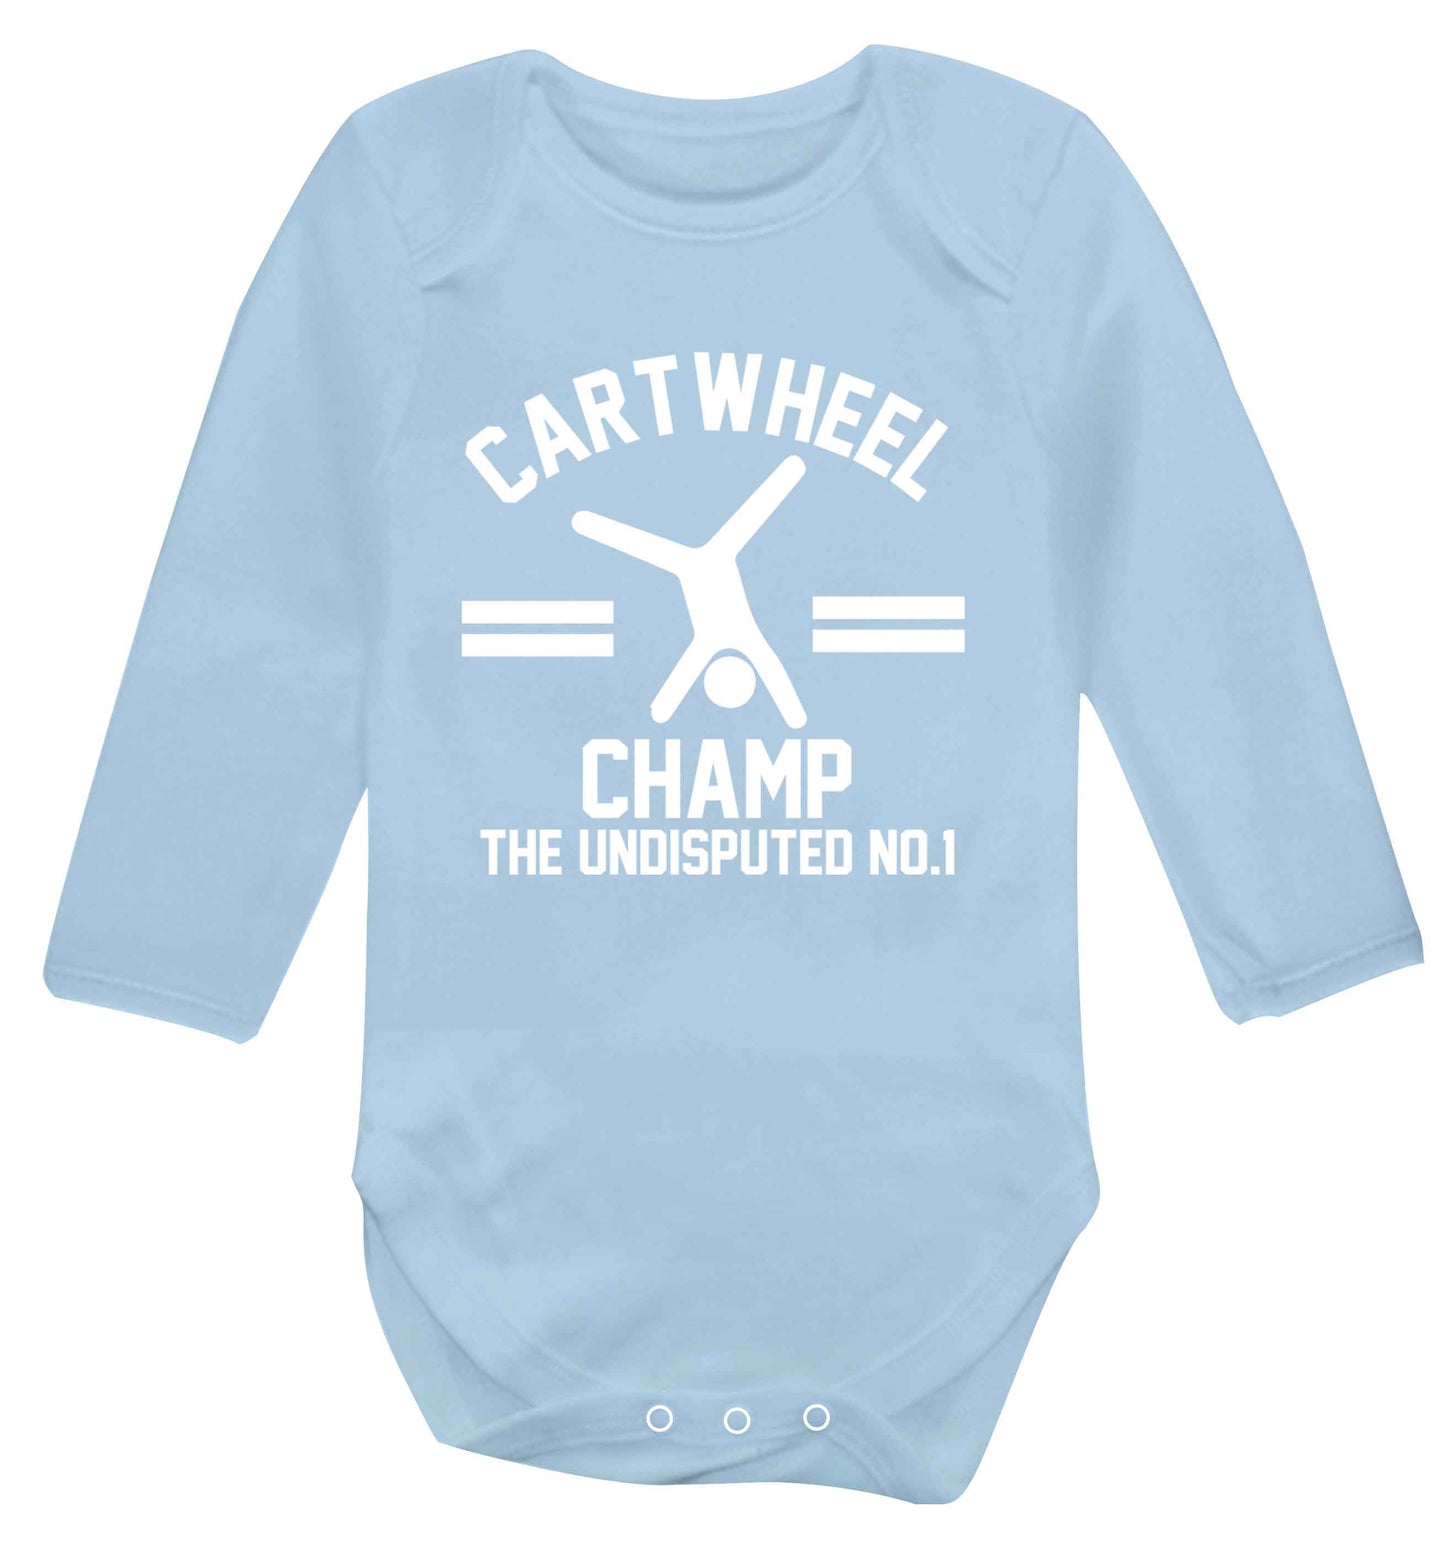 Undisputed cartwheel championship no.1  Baby Vest long sleeved pale blue 6-12 months